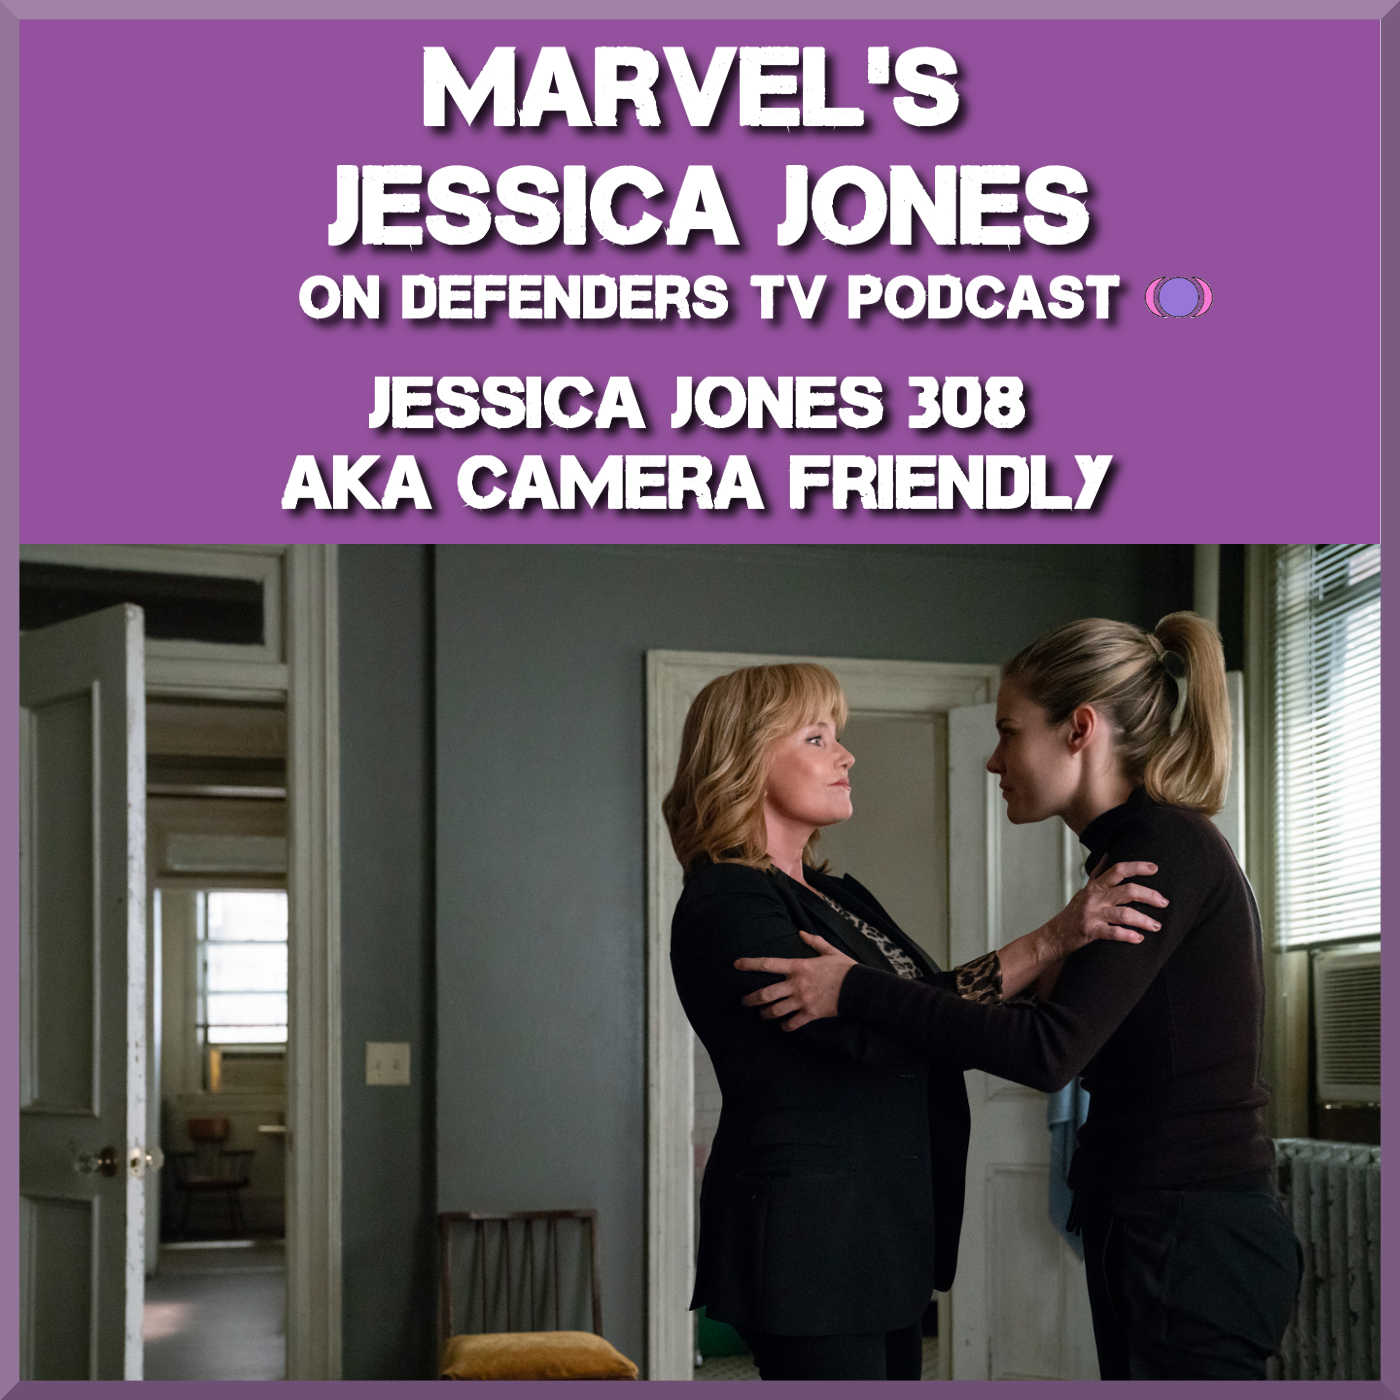 Jessica Jones 308 Review of ”AKA Camera Friendly” by TV Podcast Industries